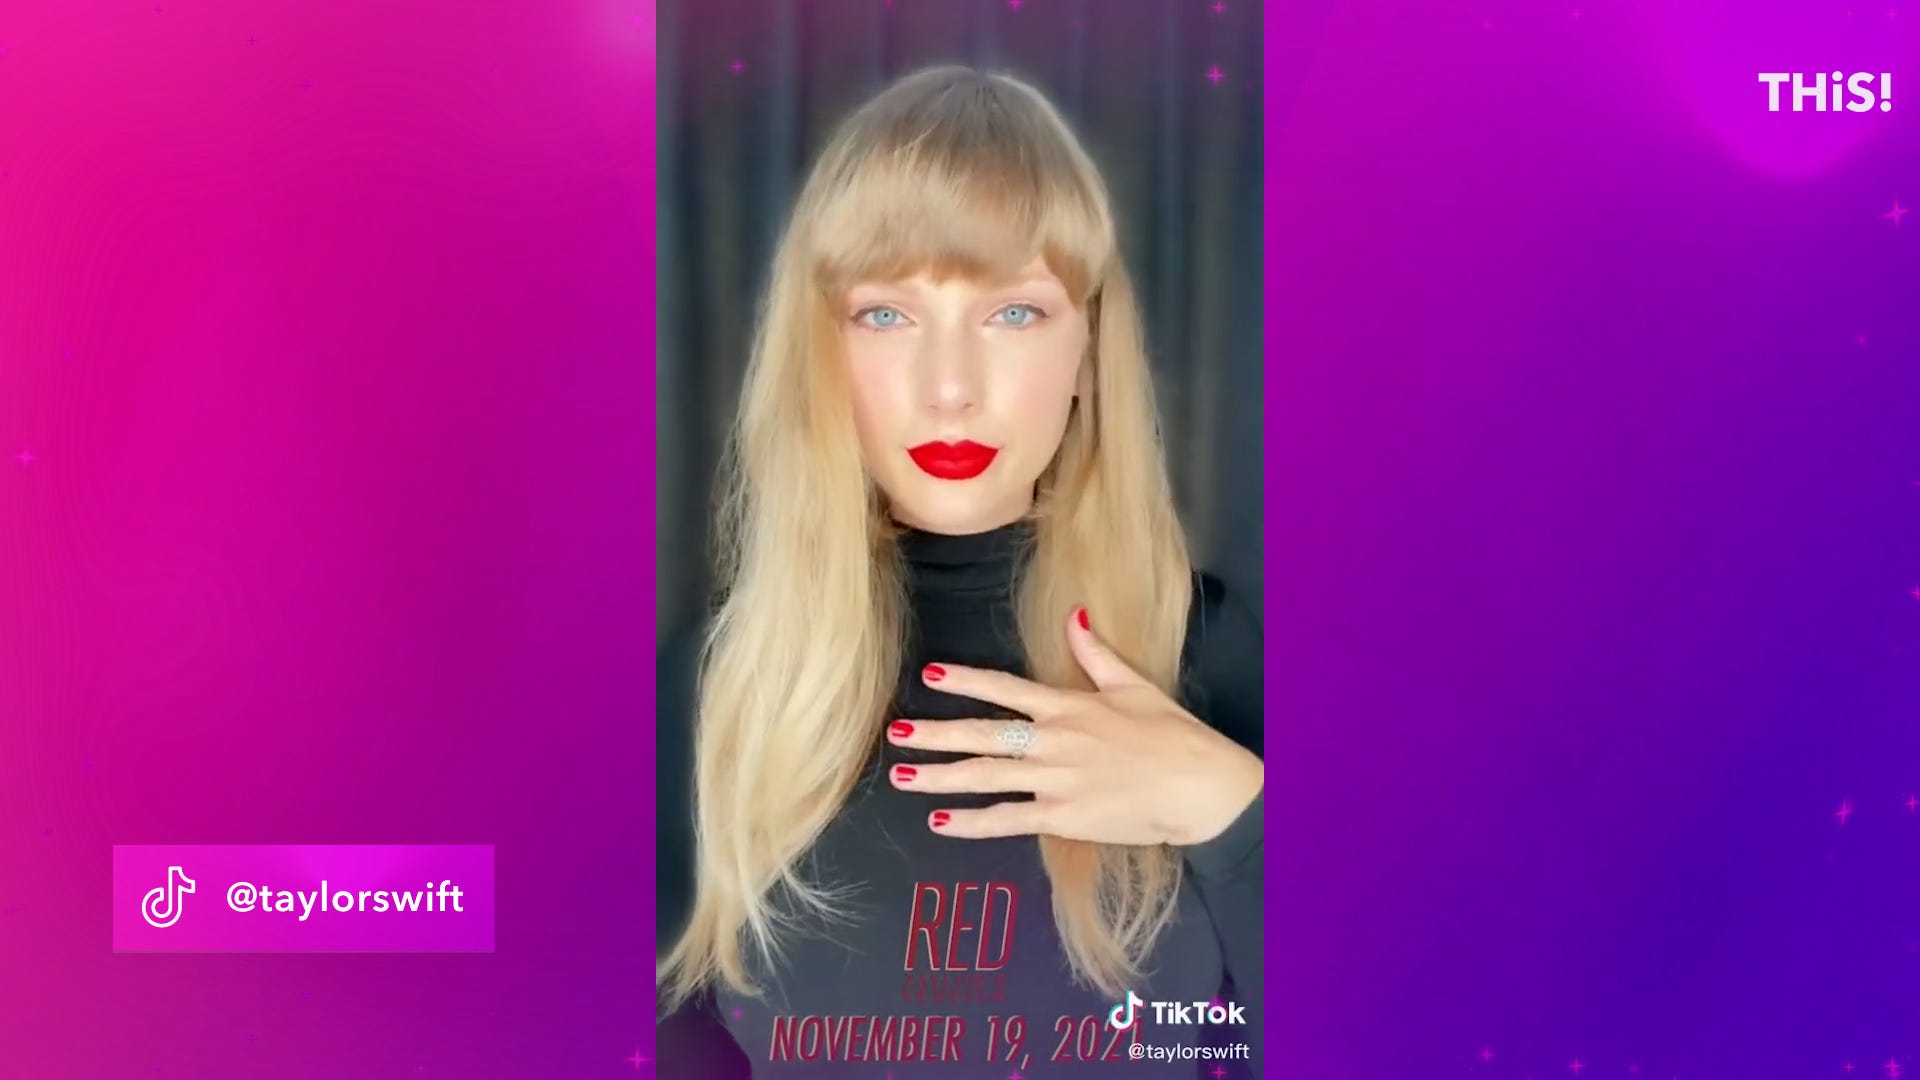 Taylor Swift joins TikTok with an announcement on the anniversary of her album 'Lover' thumbnail